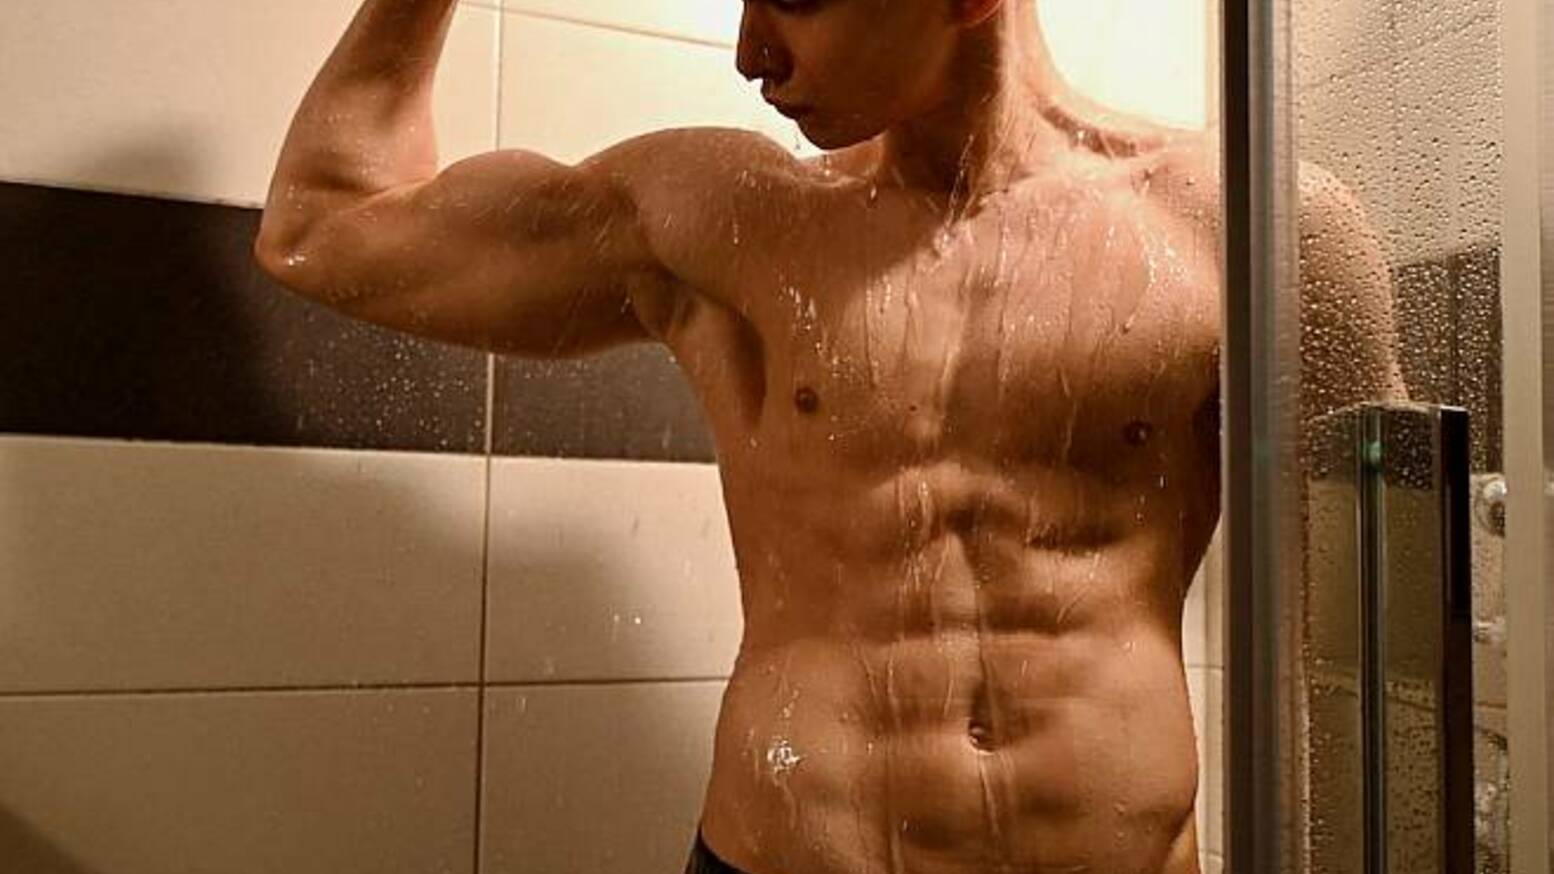 Shower Muscle Worship